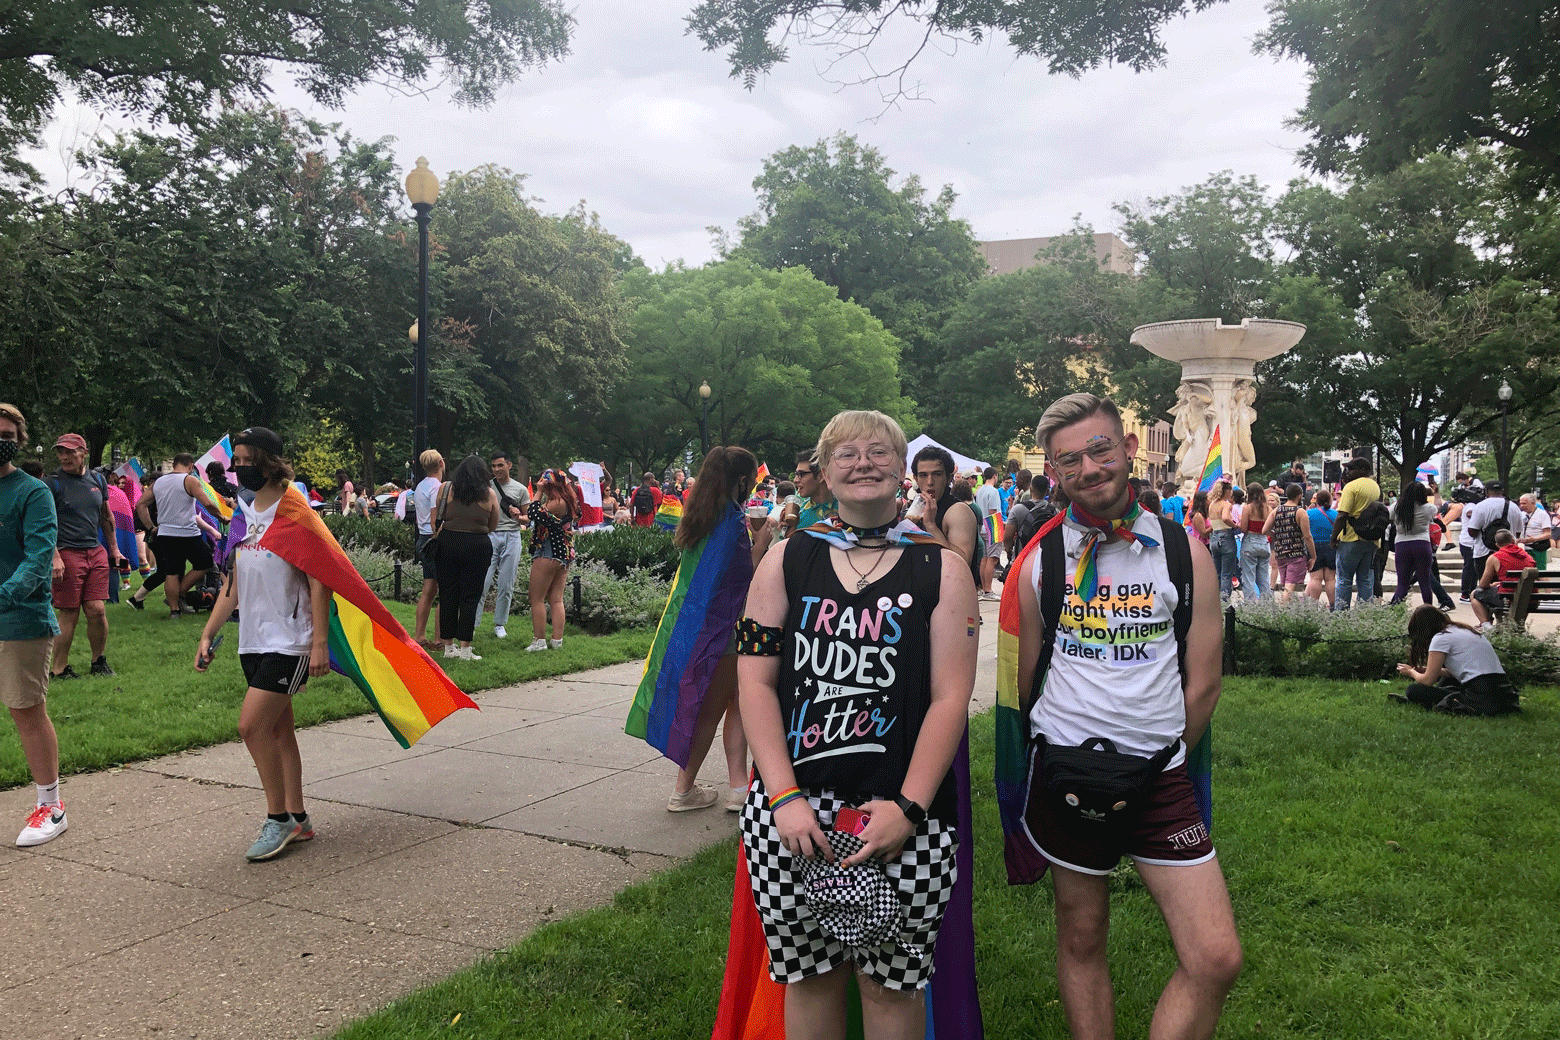 Capital Pride returns to DC streets with colorful march, car parade